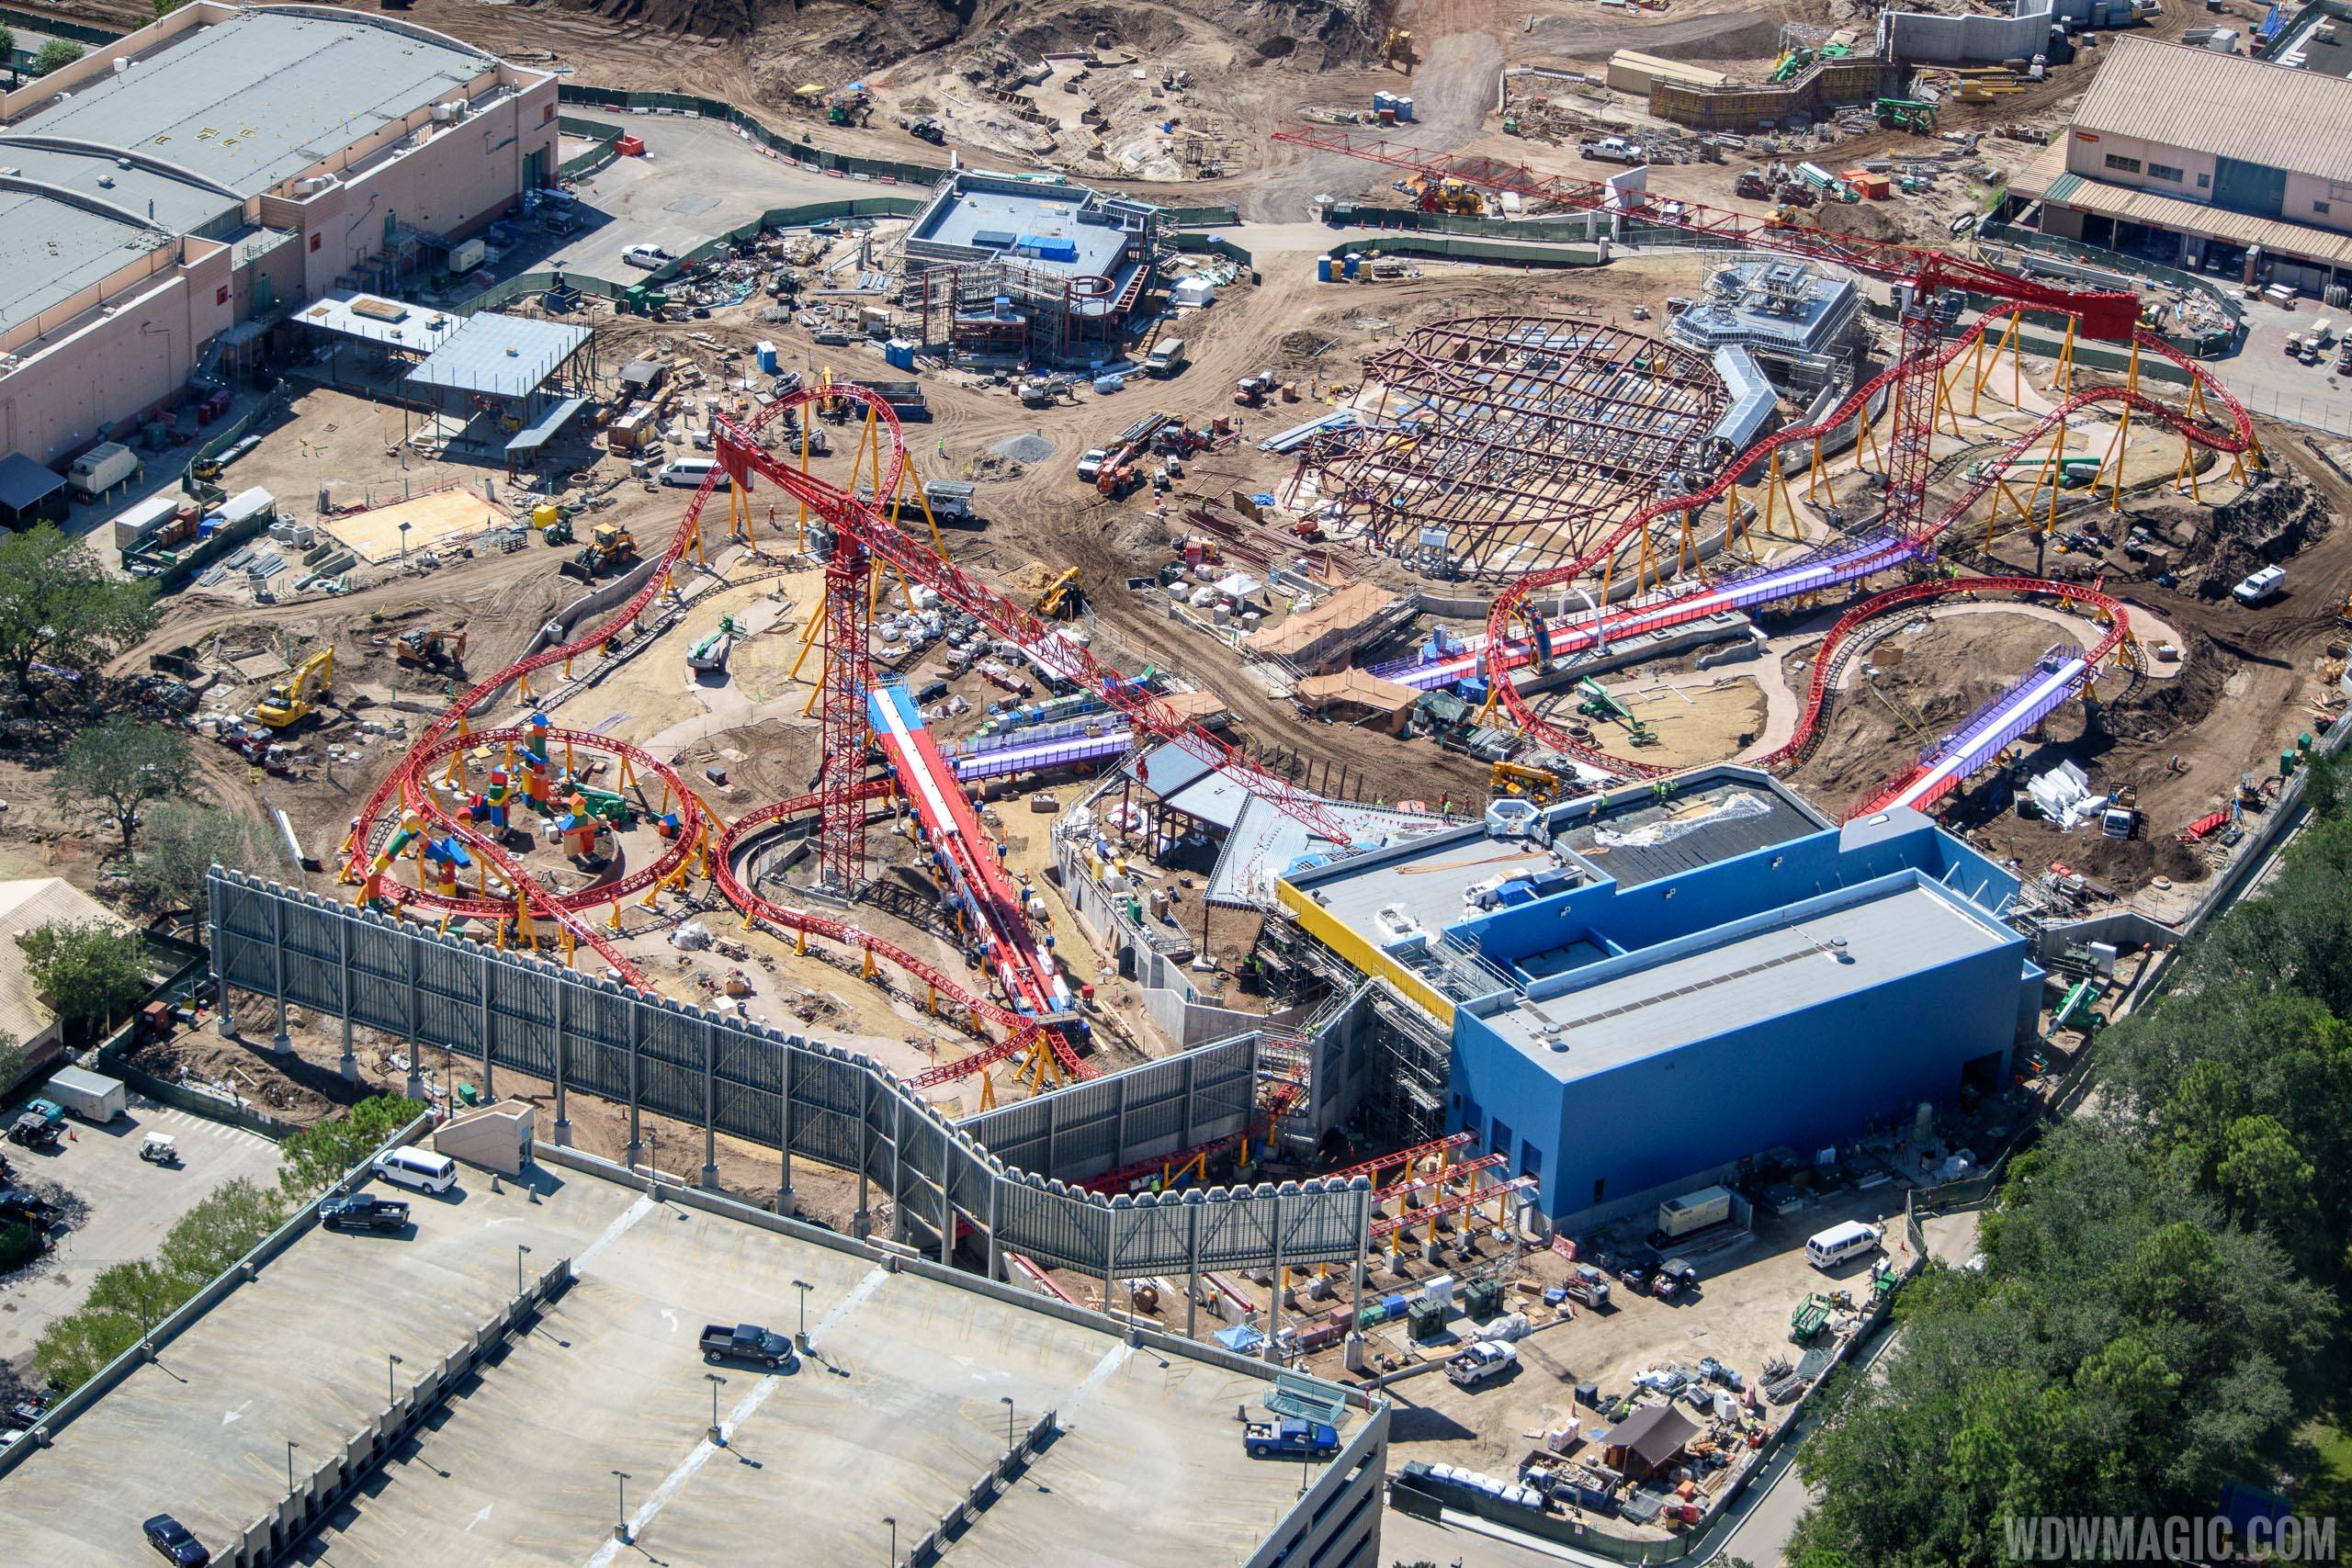 Overview of Toy Story Land from the air